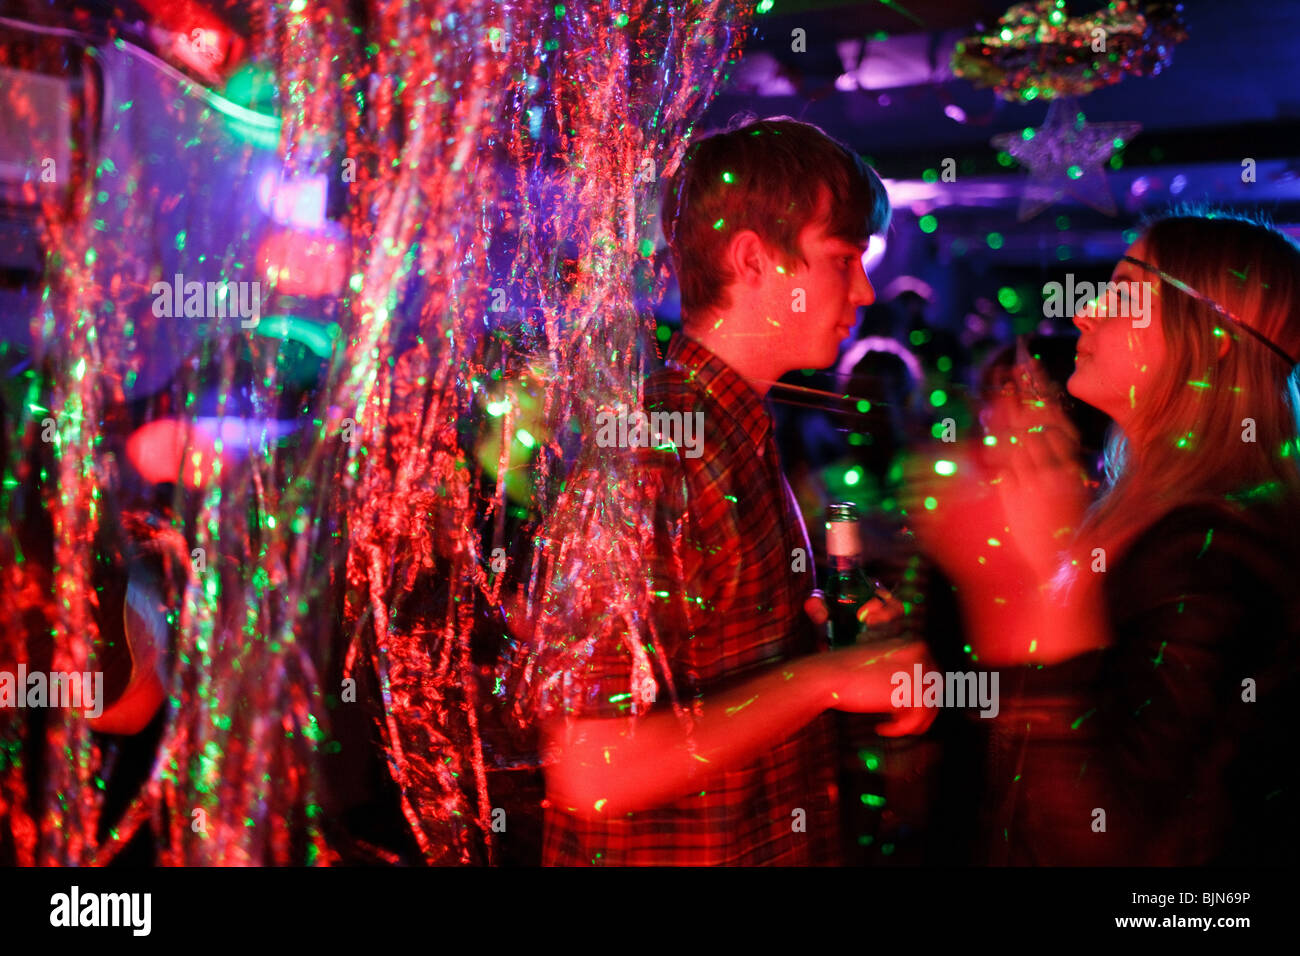 Party in the Dalston Superstore club in Dalston in Hackey, London. Stock Photo